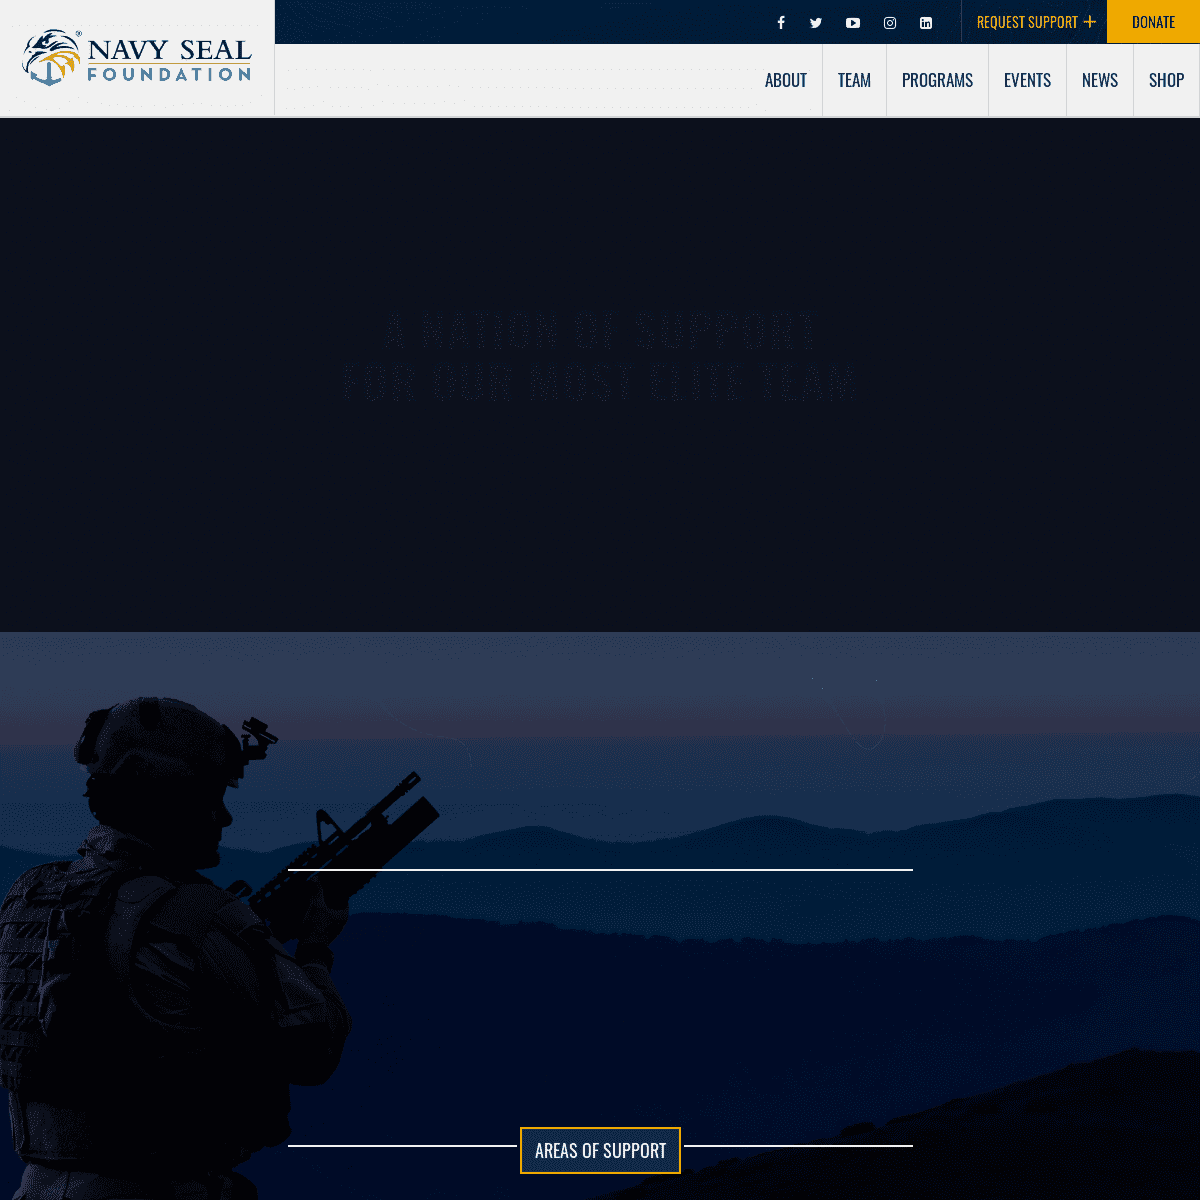 A complete backup of https://navysealfoundation.org